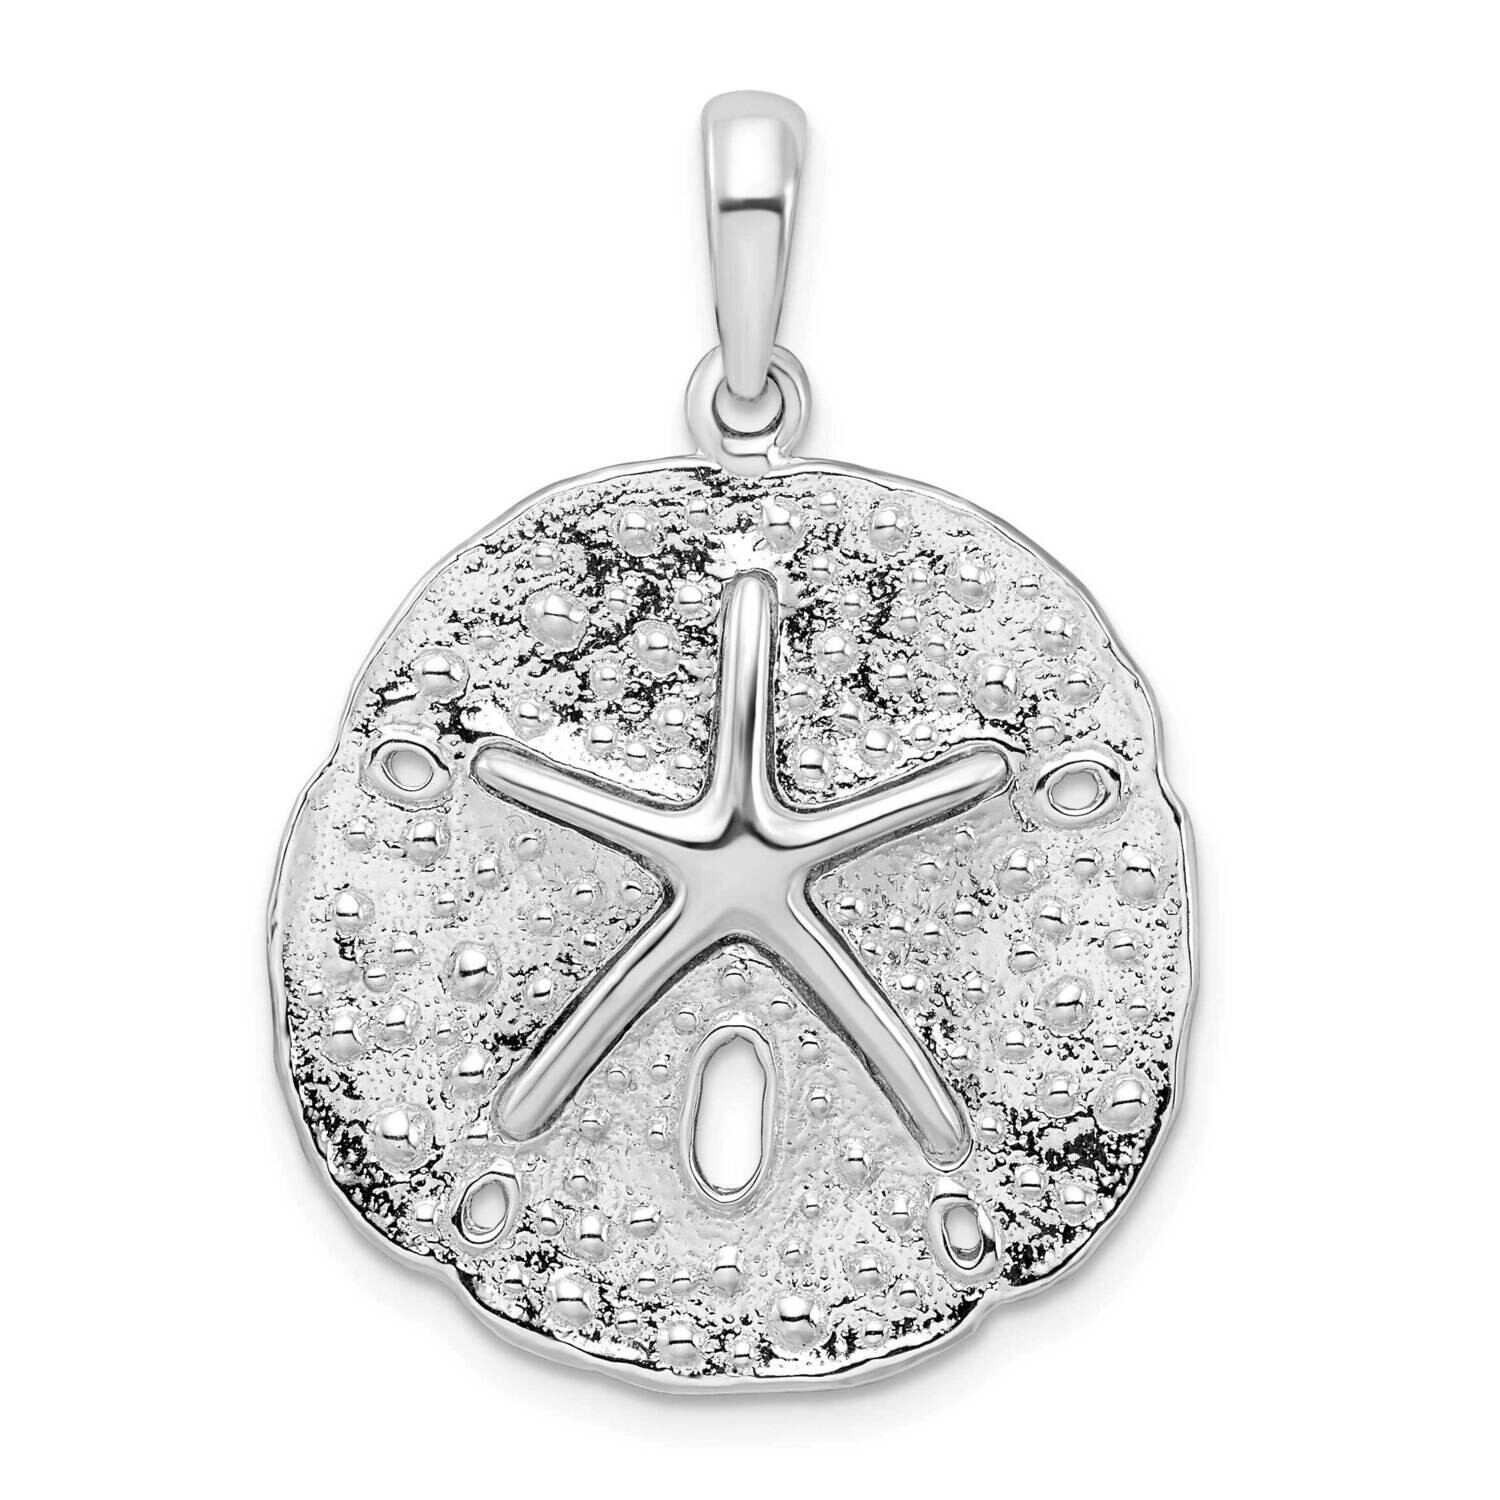 Textured SDollar Pendant Sterling Silver Polished QC10097